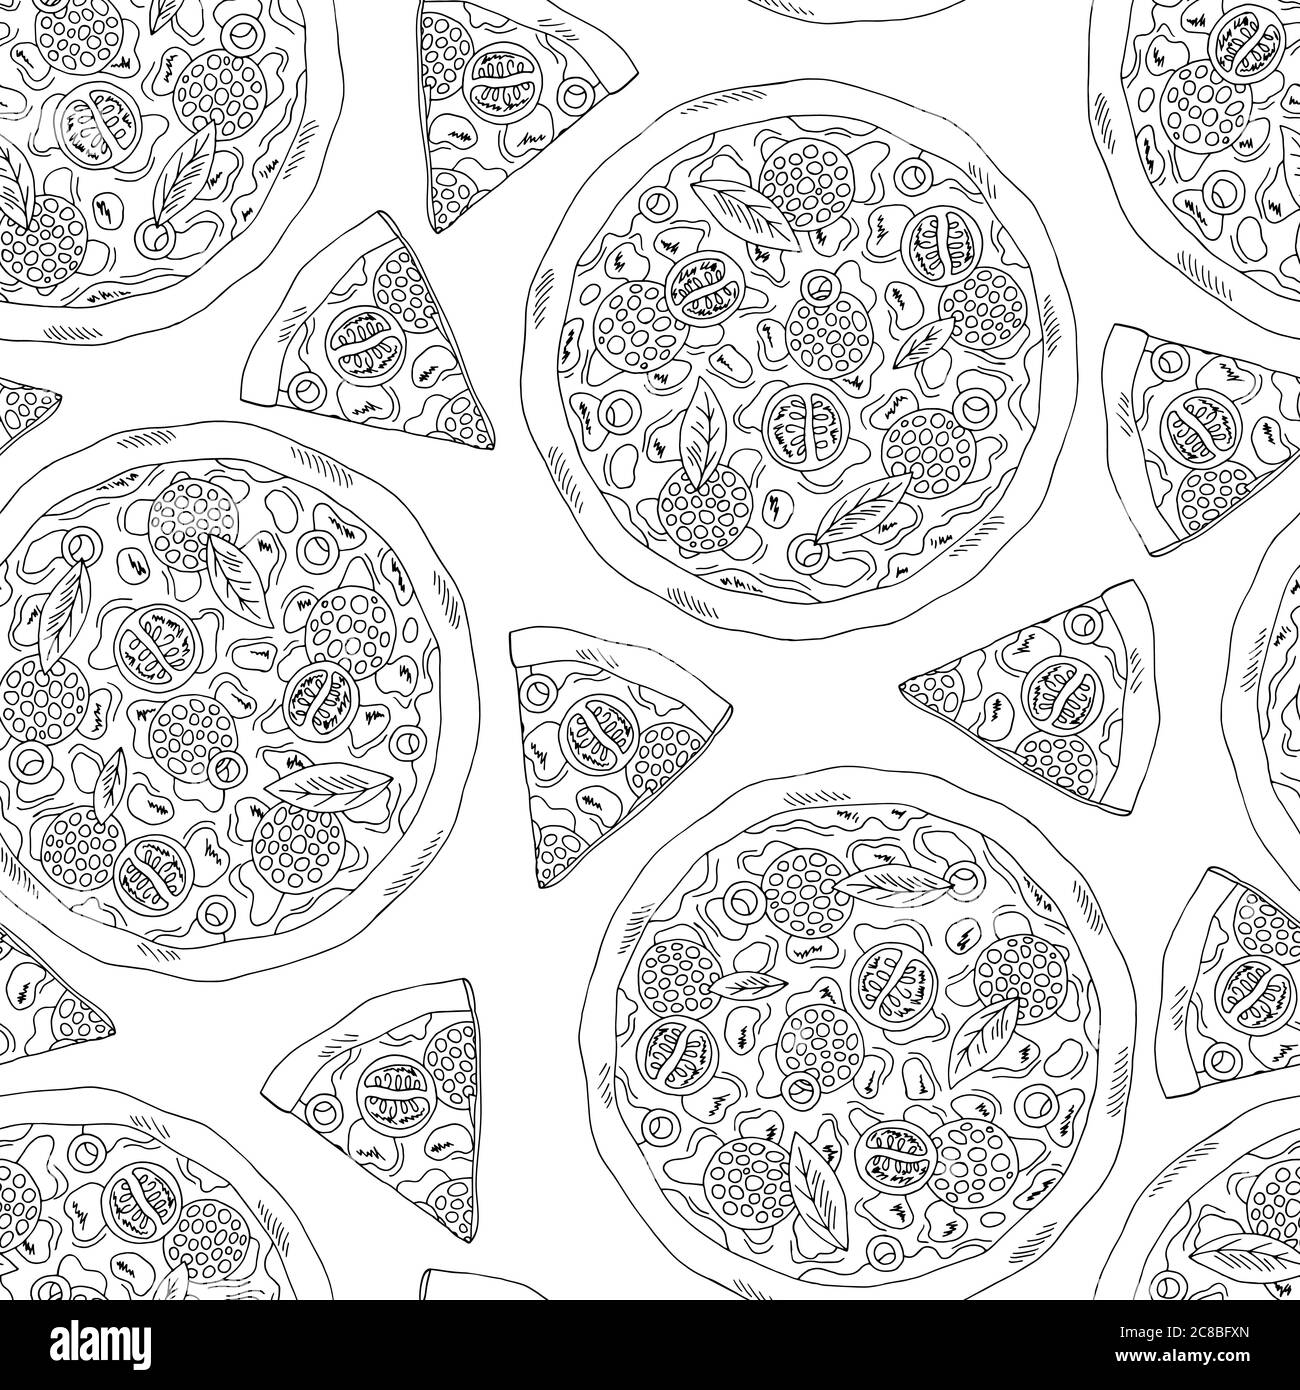 Pizza graphic fast food black white seamless pattern background sketch illustration vector Stock Vector